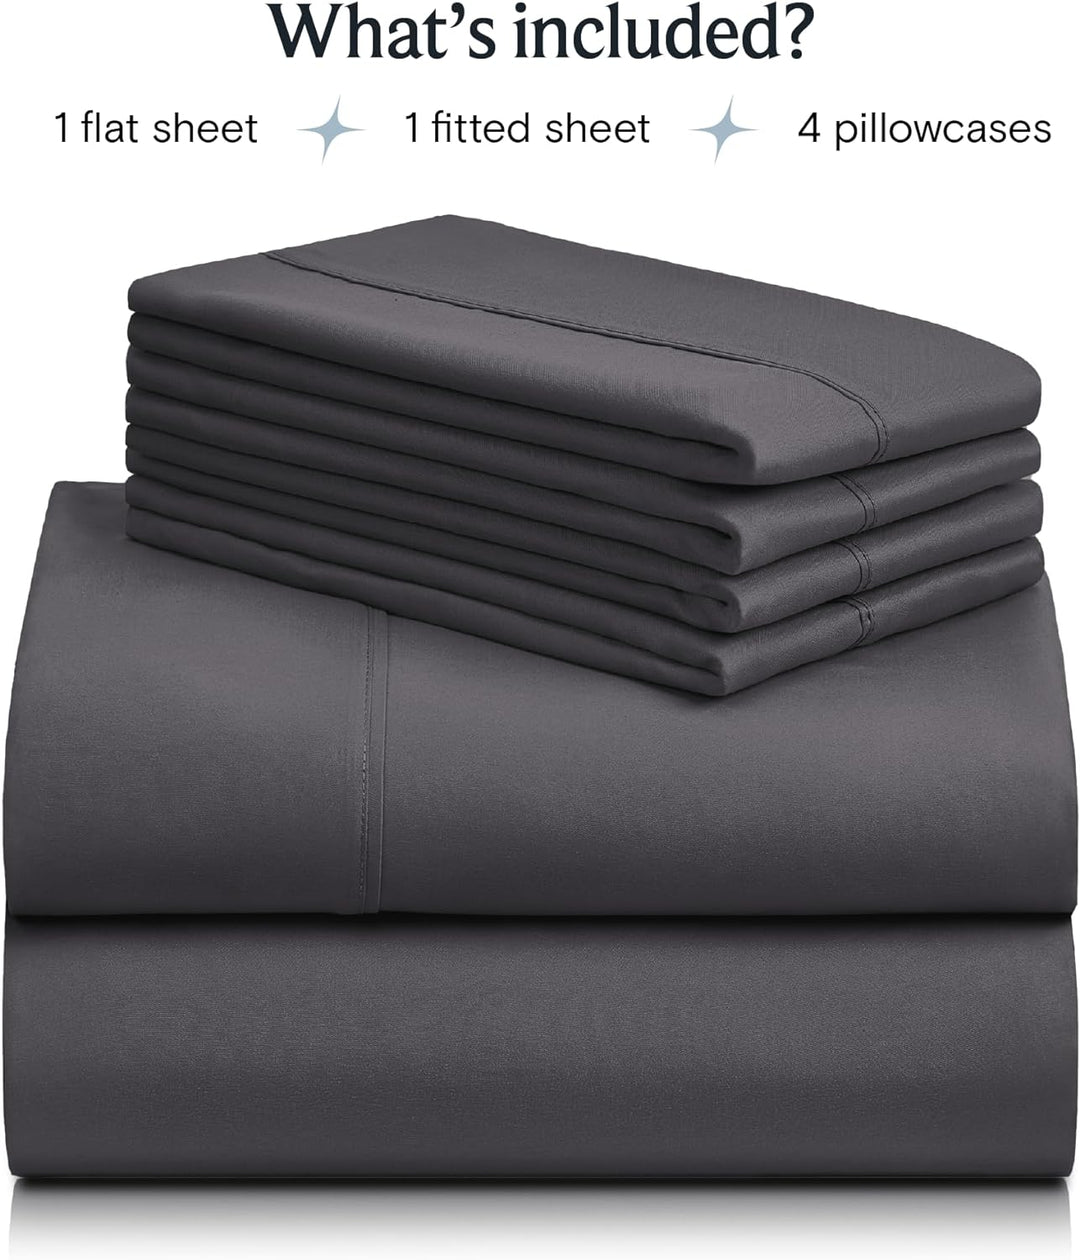 a stack of grey sheets with text: 'What's included? 1 flat sheet 1 fitted sheet 4 pillowcases'